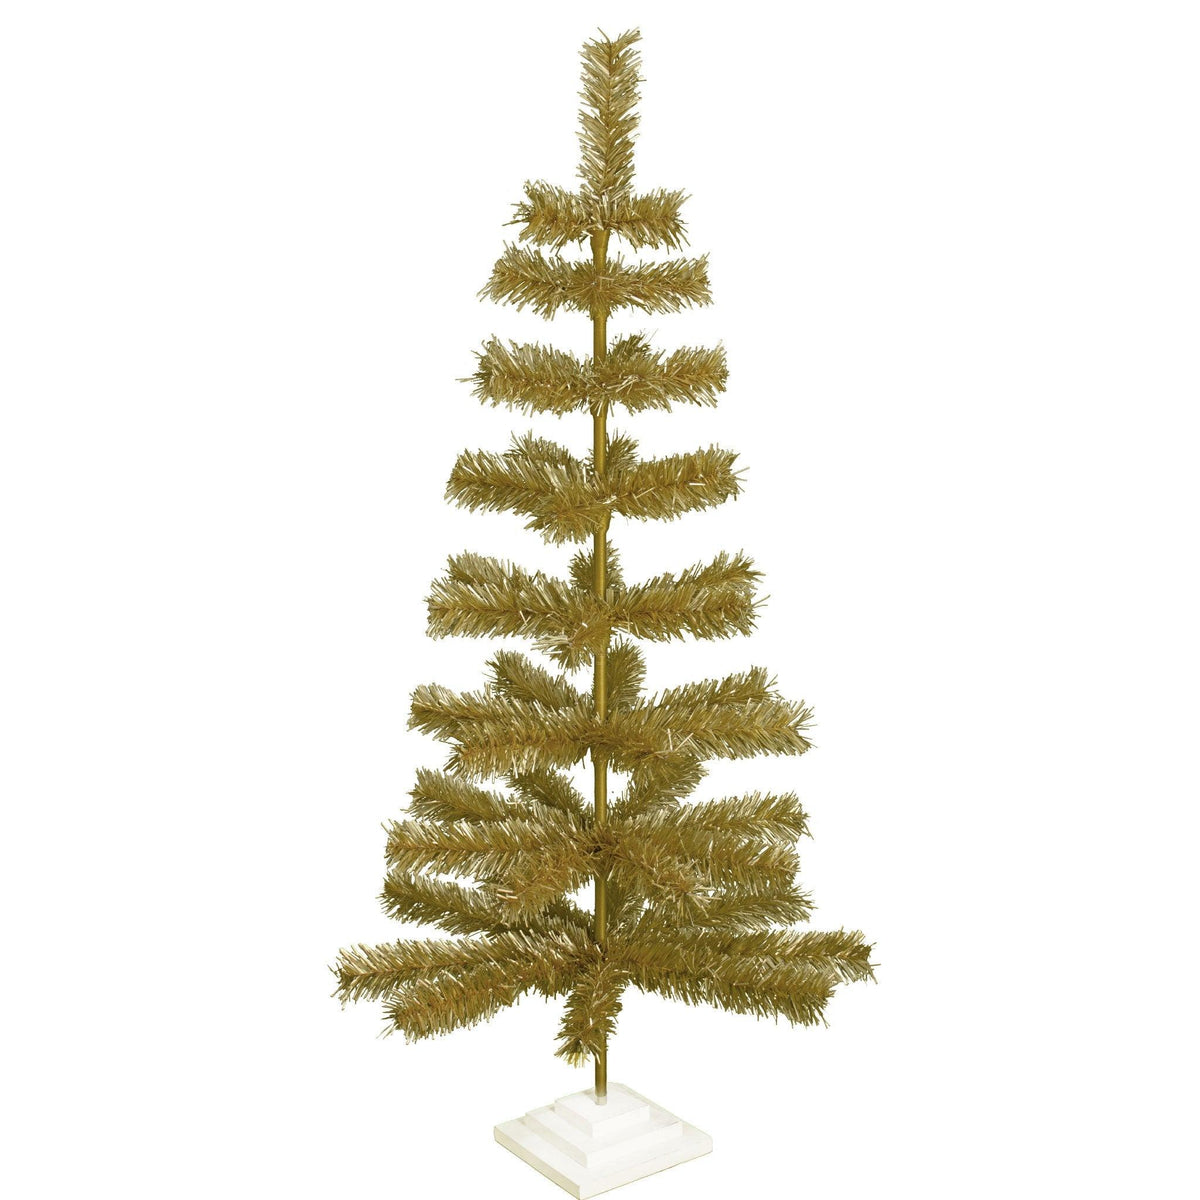 Our 48in Tall Antique Gold Christmas Tree.  Celebrate Lee Display's 120th Anniversary with our brand new Antique Gold colored tinsel Christmas Trees.  Shop for antique gold christmas trees at leedisplay.com